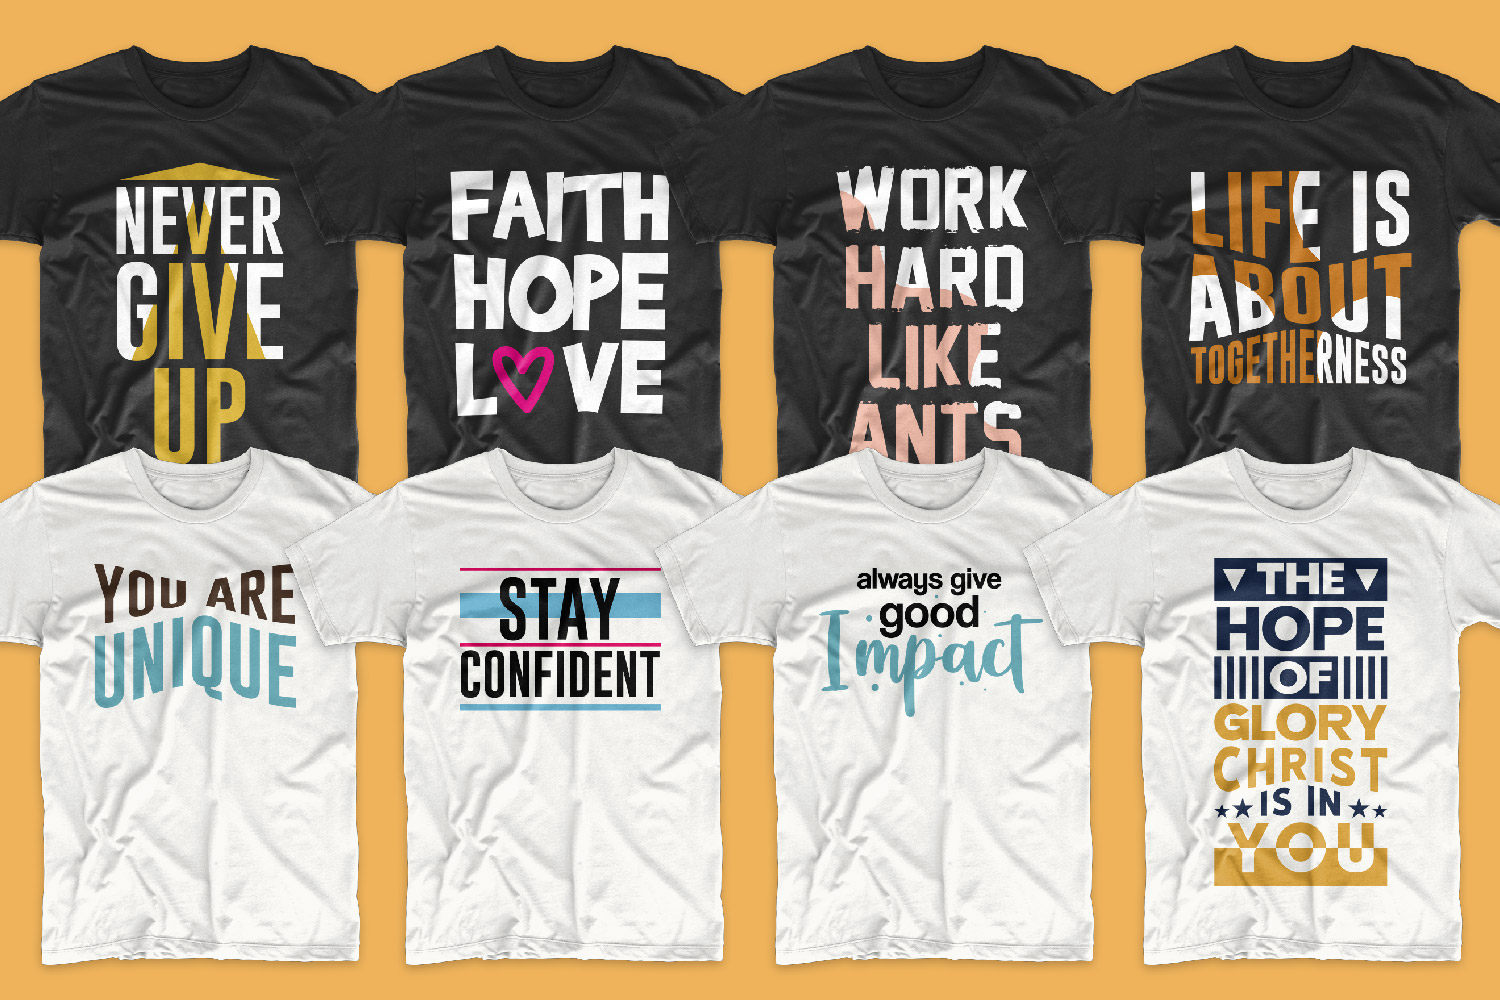 This set contains only black and white T-shirts with different colored lettering.